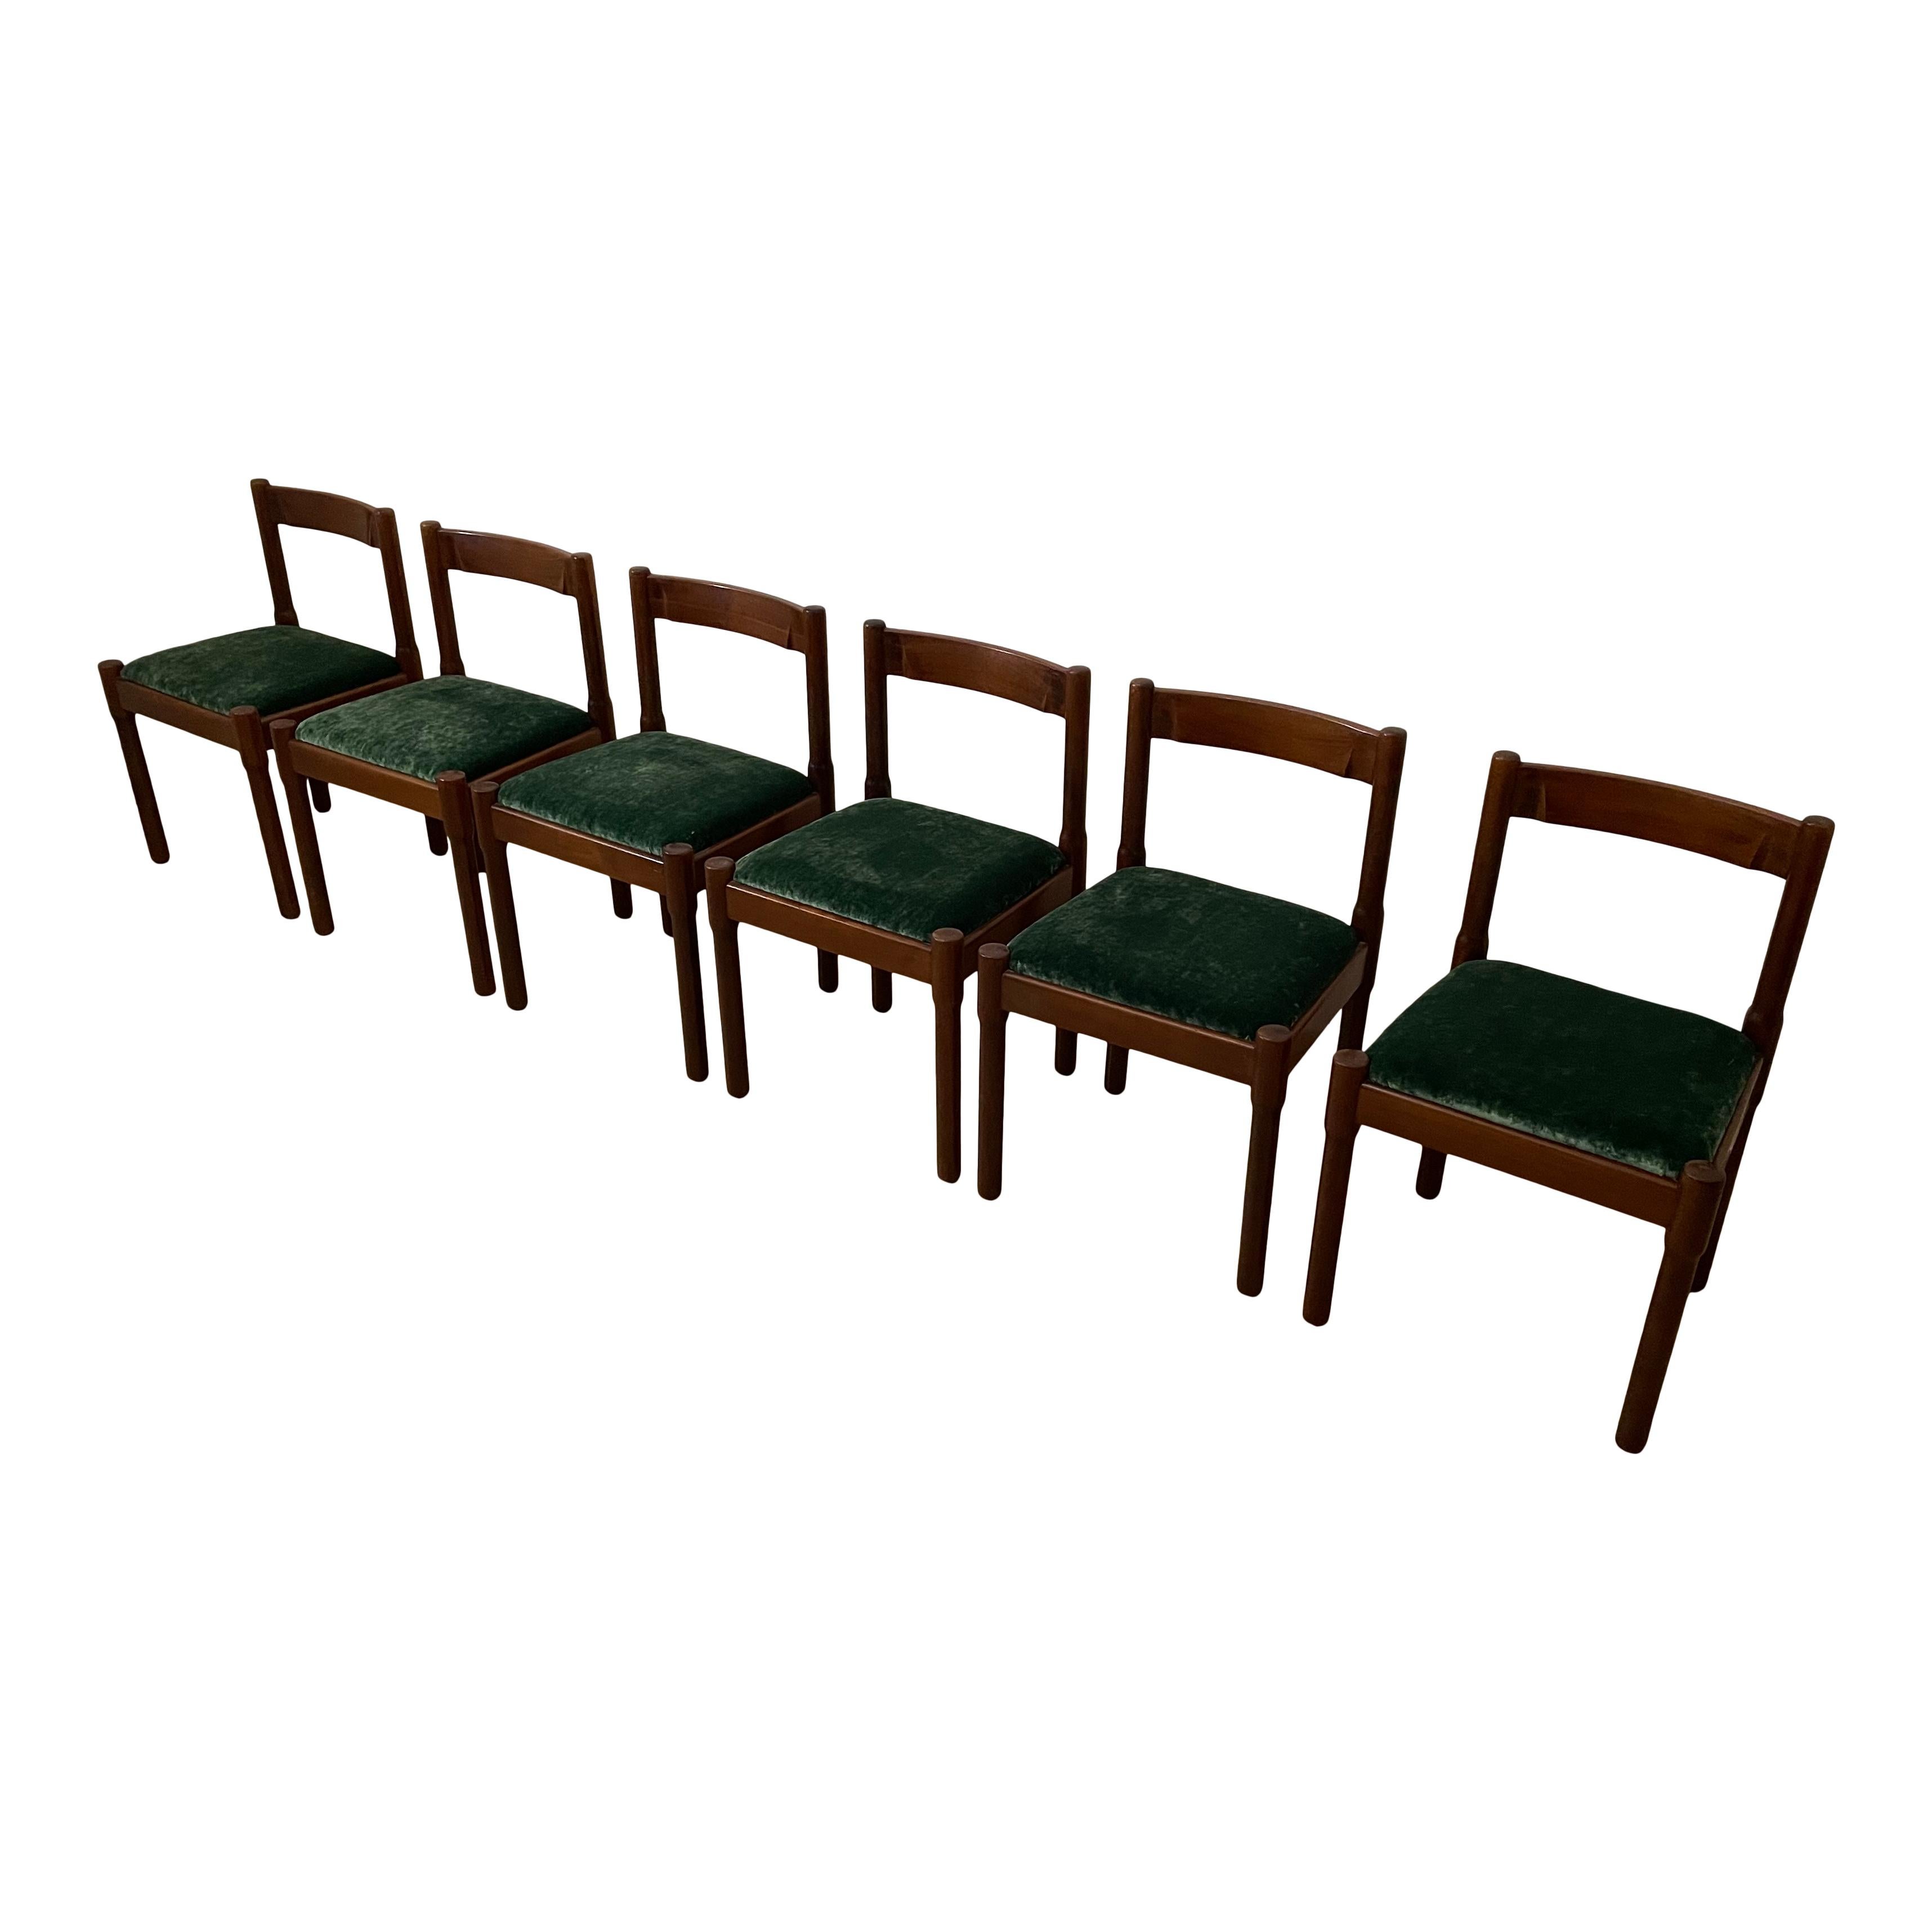 Italian Vico Magistretti Midcentury “Carimate” Dining Chair for Cassina, 1963, Set of 4 For Sale